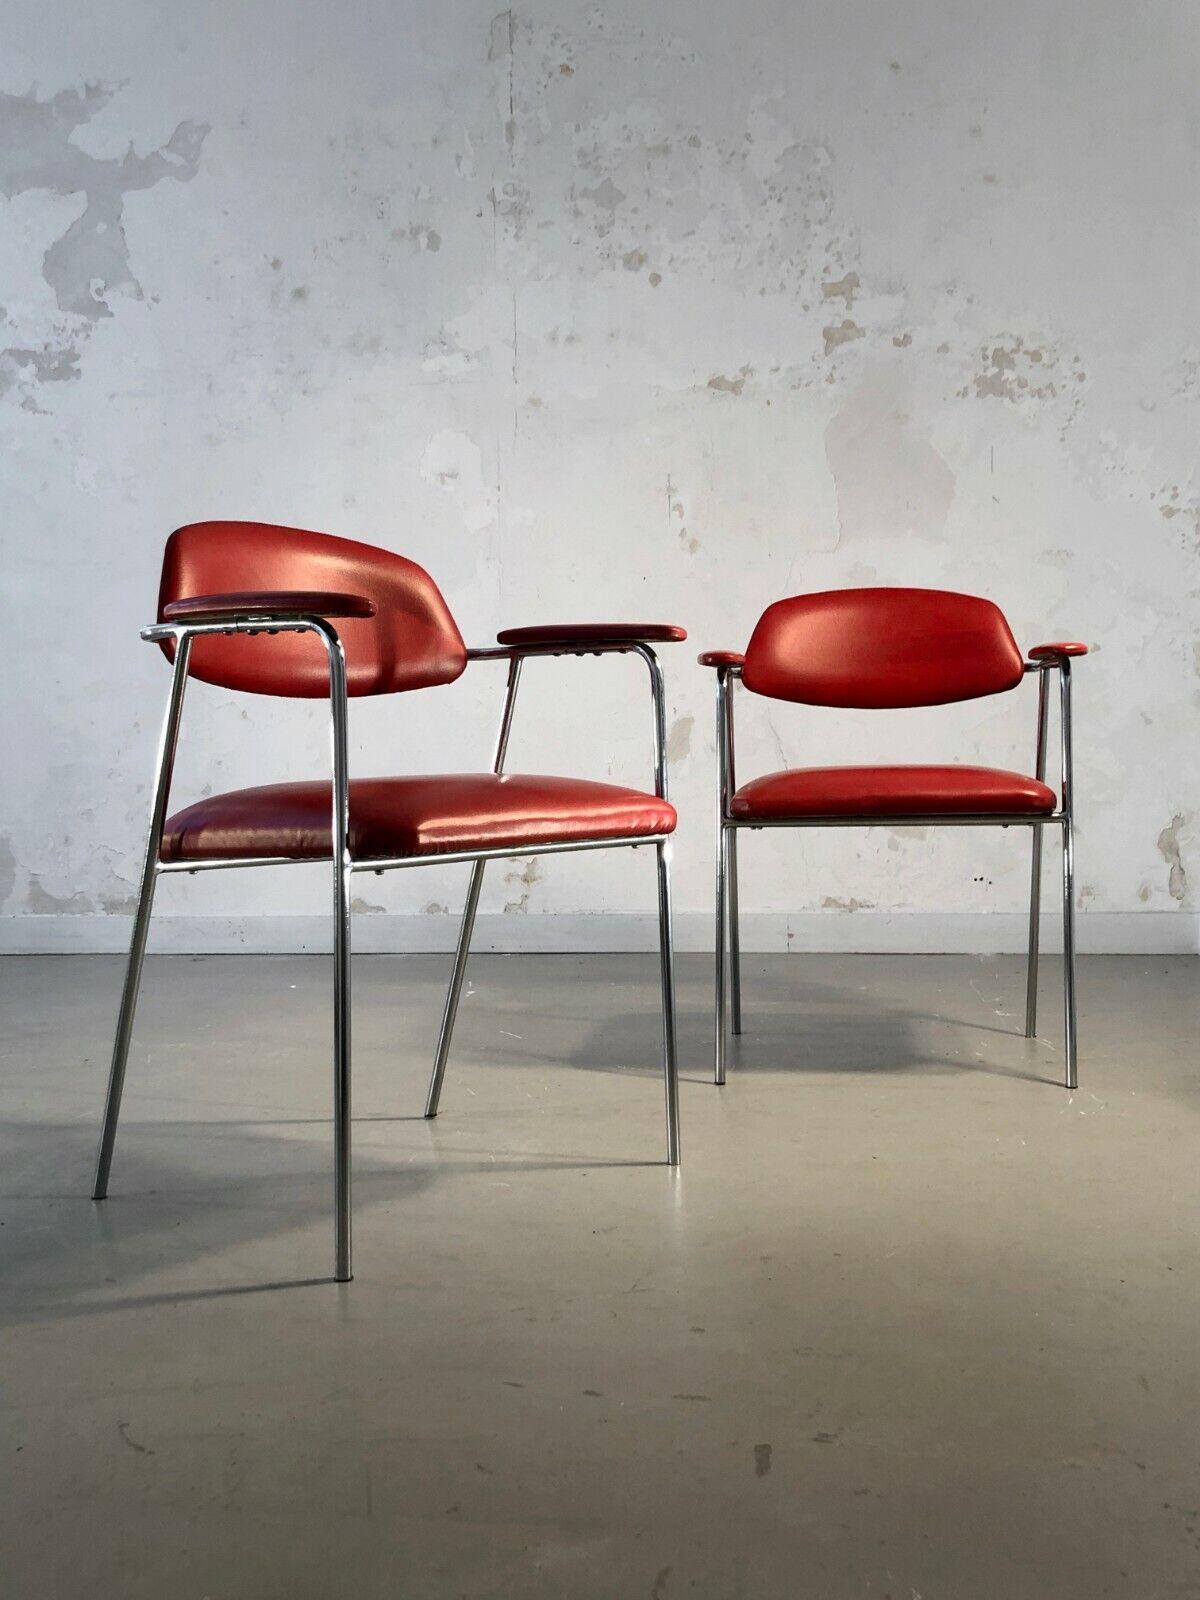 French 2 MID-CENTURY-MODERN MODERNIST CHAIRS by PIERRE PAULIN, STEINER, France 1950 For Sale